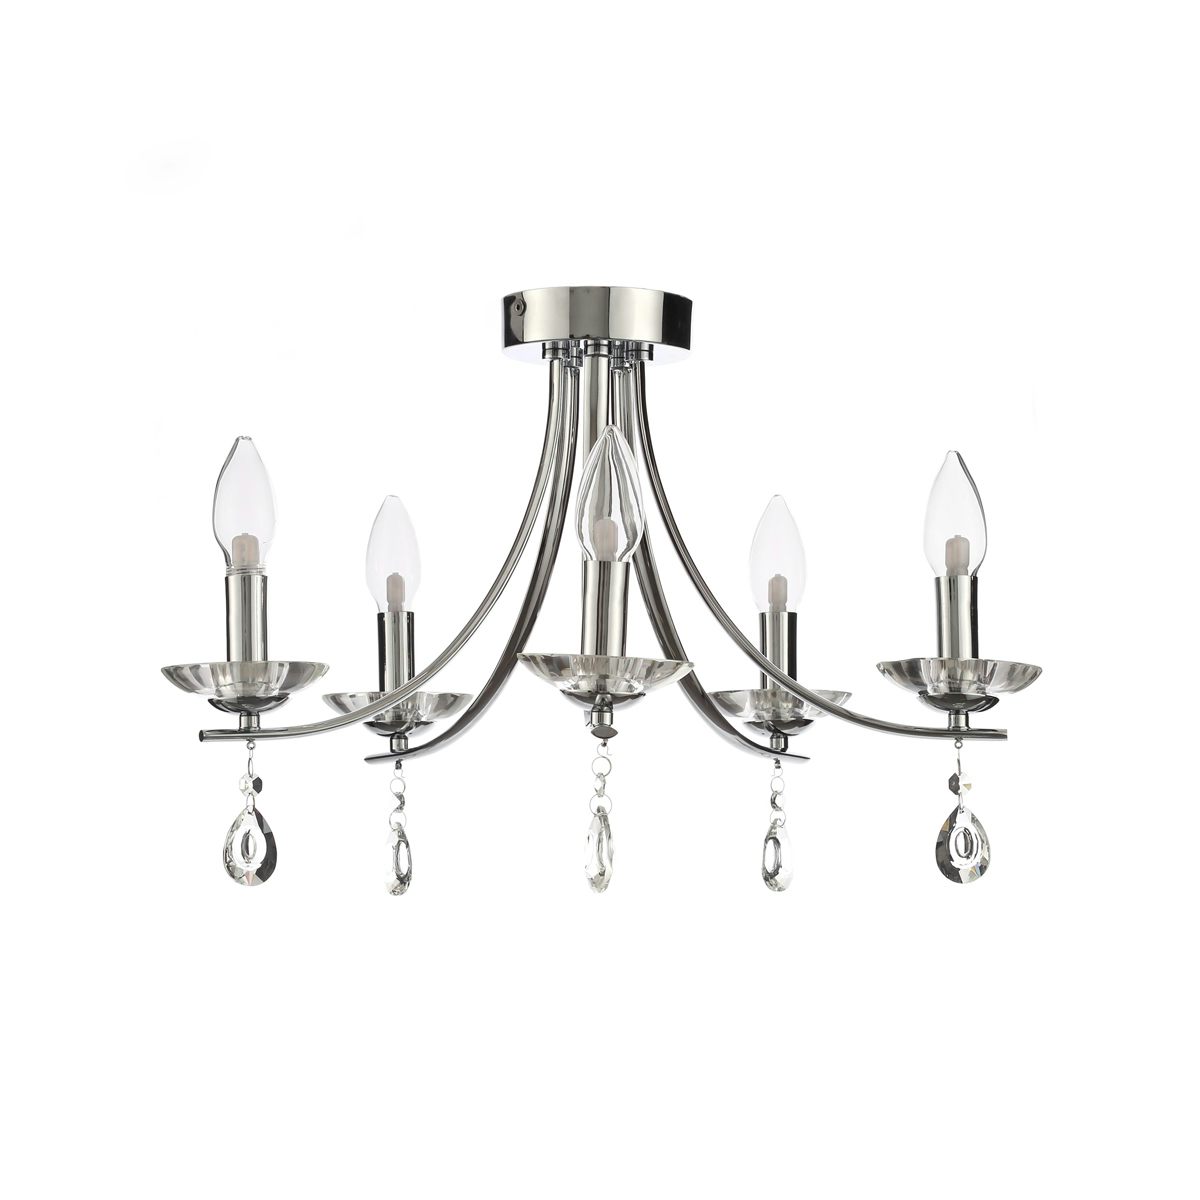 Marquis by Waterford Brandon 5 light bathroom ceiling light